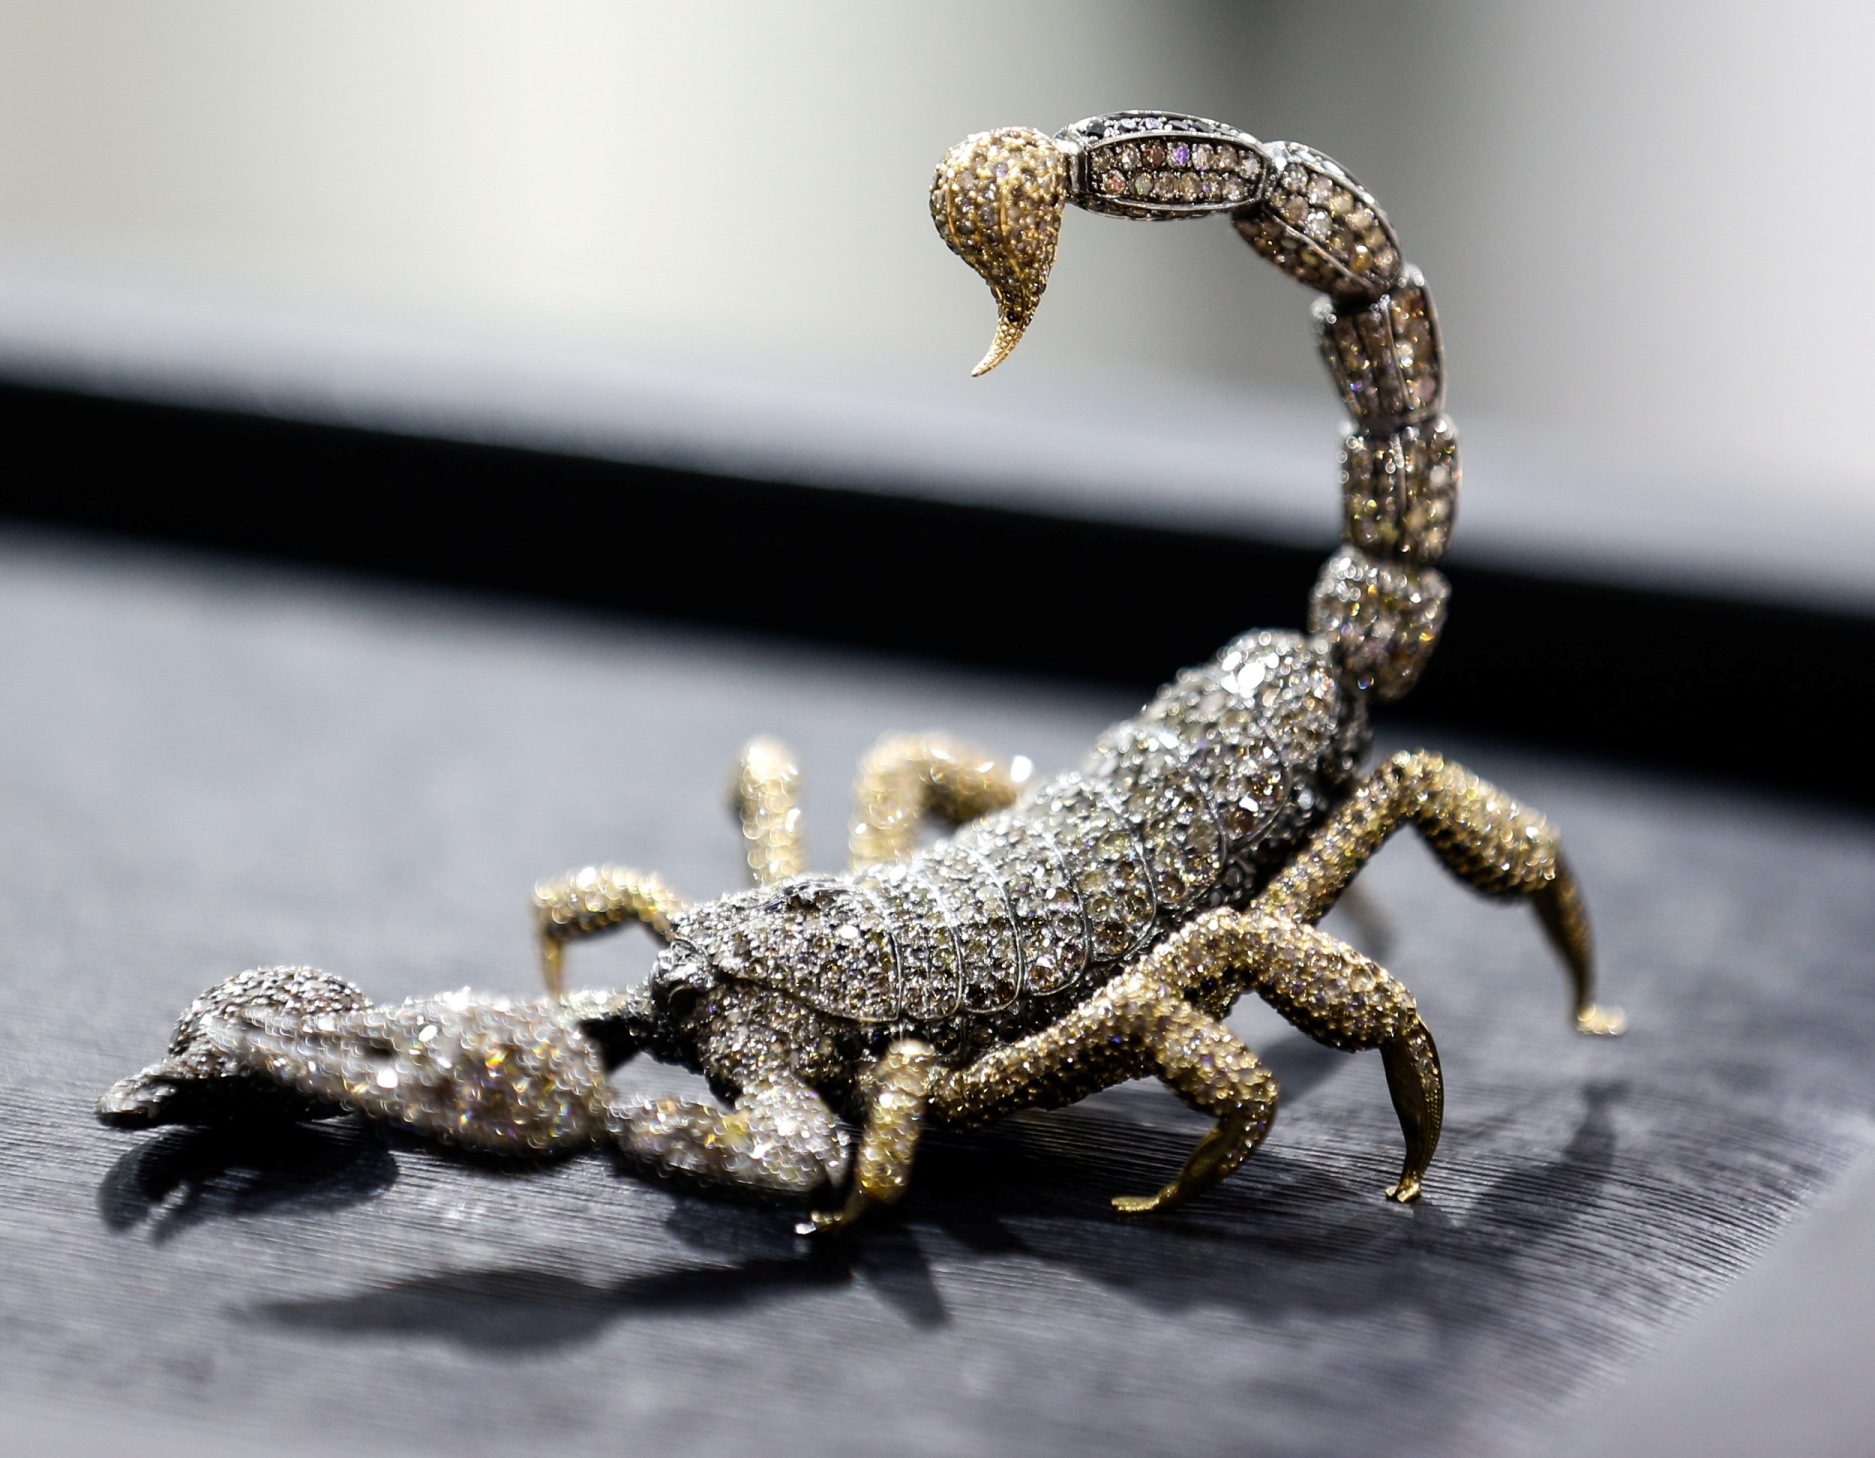 The Scorpion is made from 69 Ct diamonds and contains 3.480 stones. With a base made of 69 Ct gold, the piece is inspired by the designer and his spouse being Scorpios. 